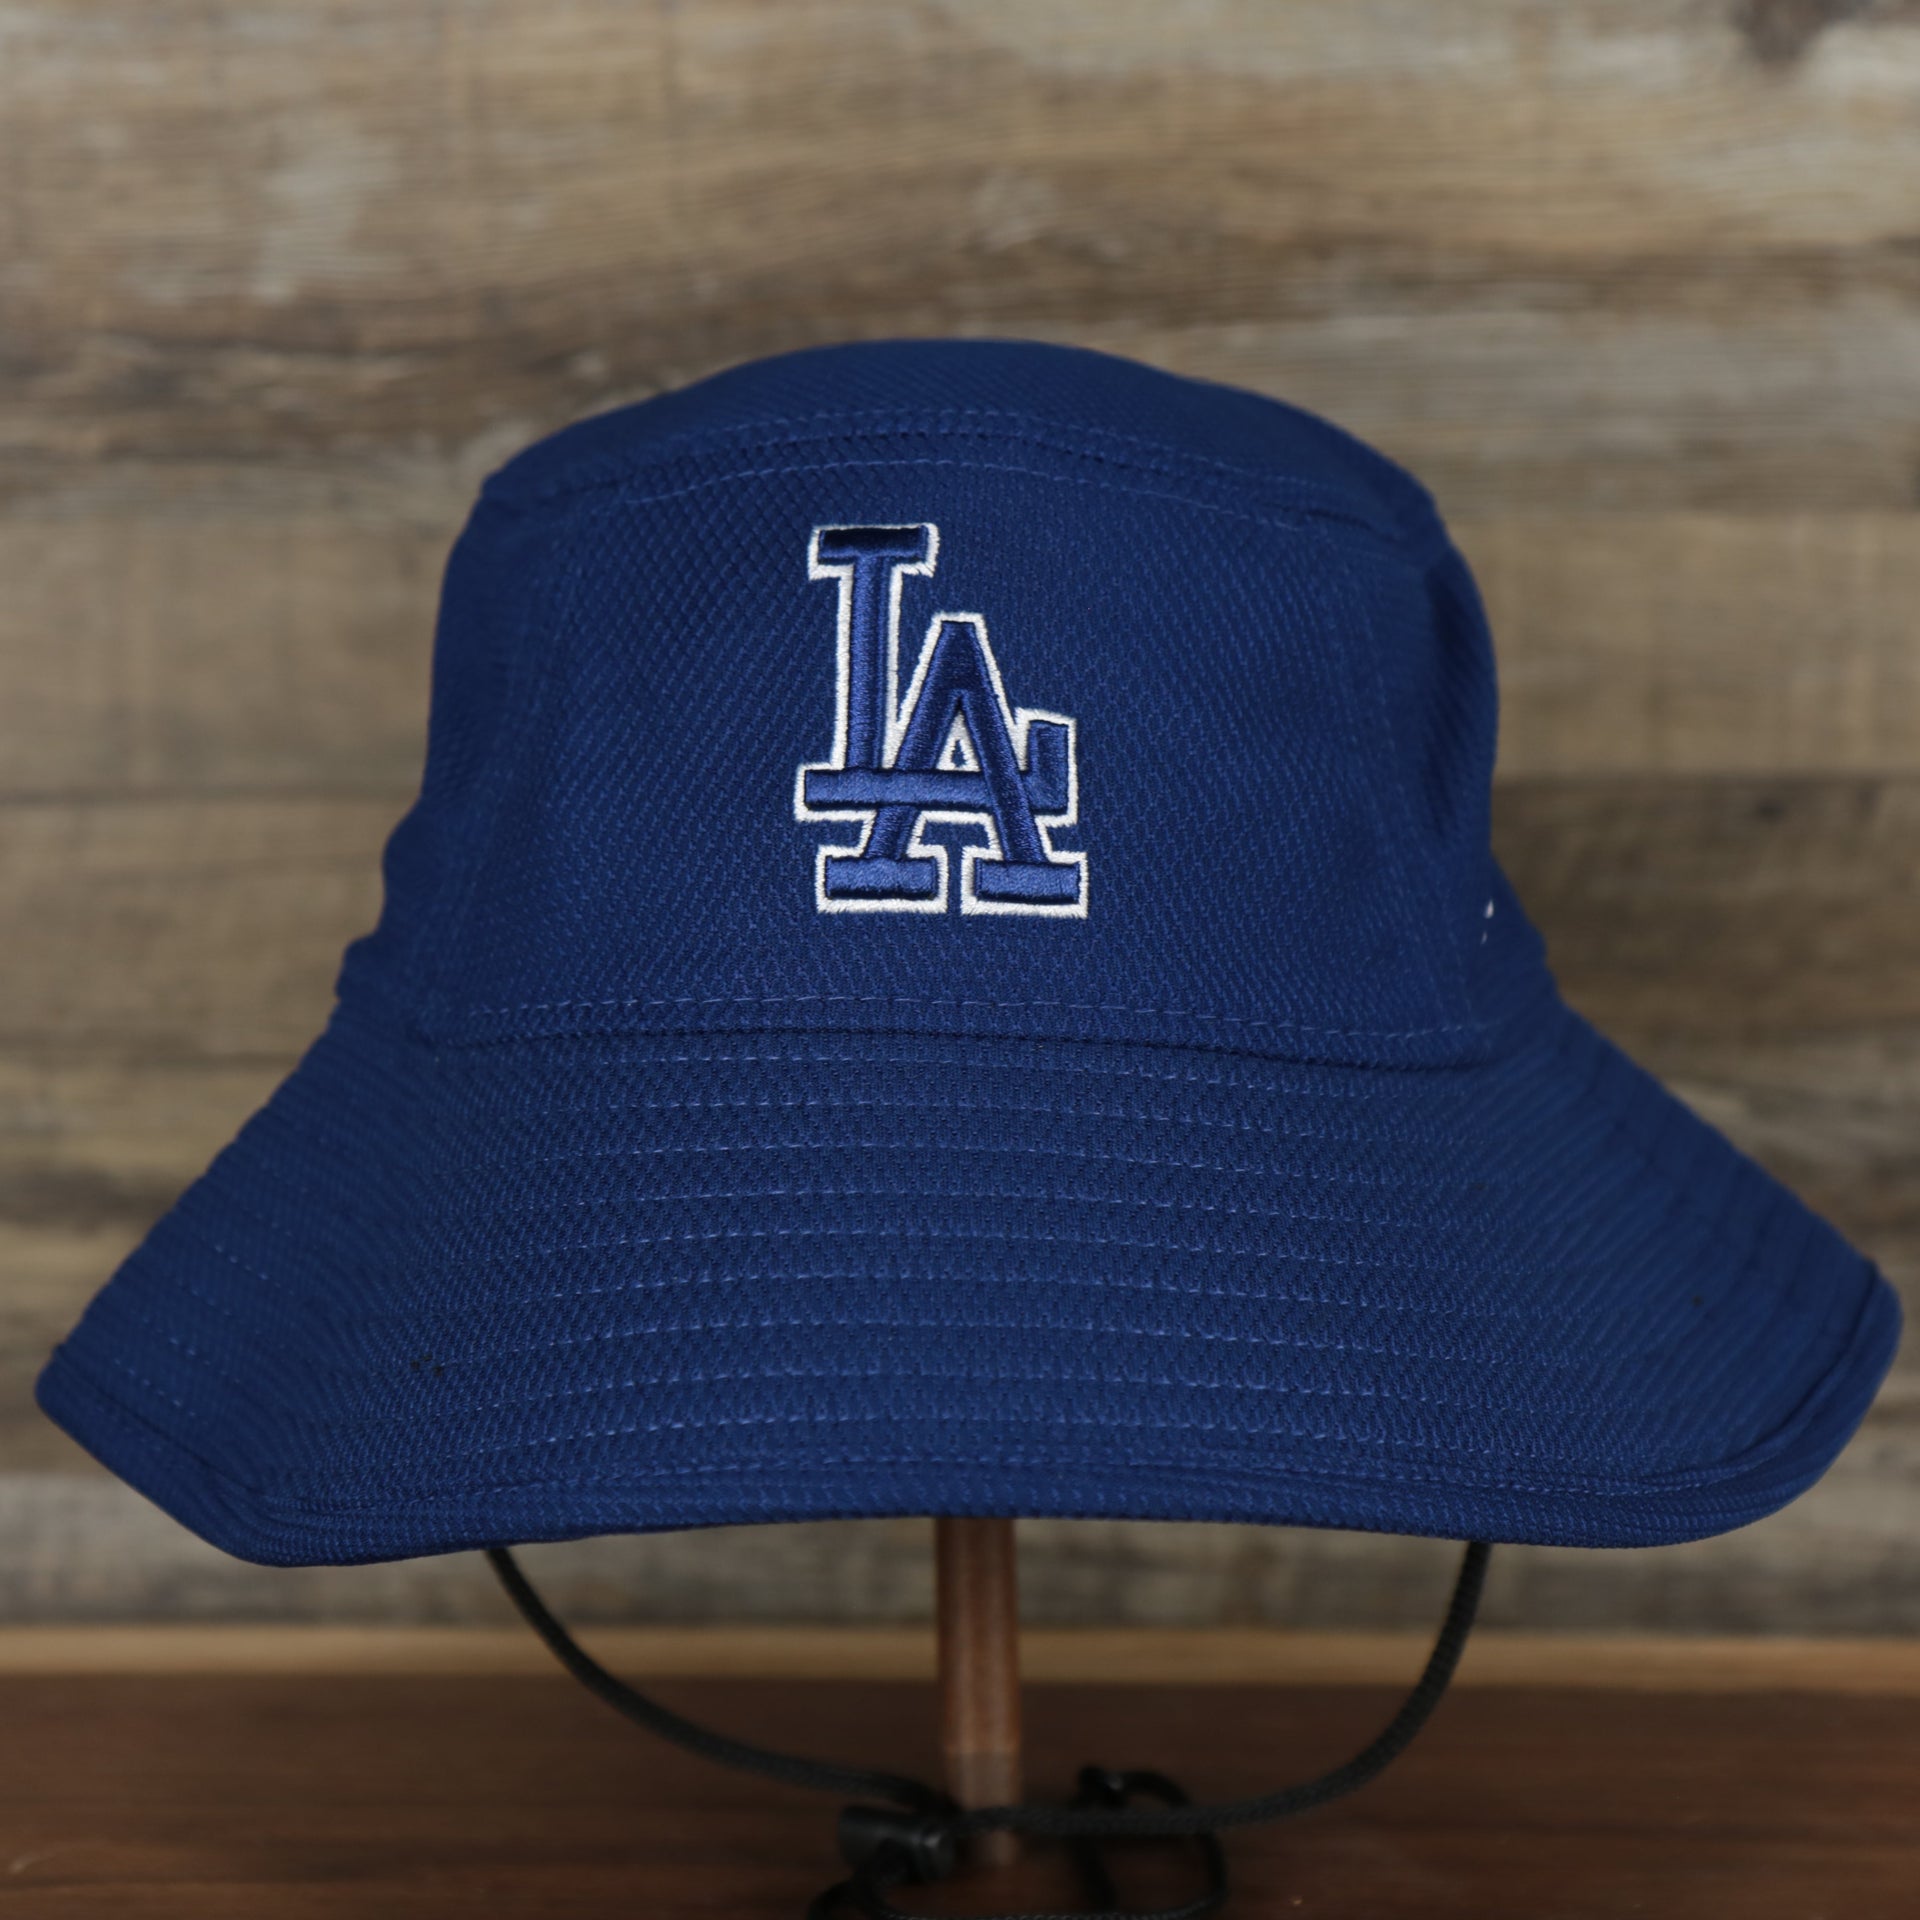 The Los Angeles Dodgers MLB 2022 Spring Training Onfield Bucket Hat